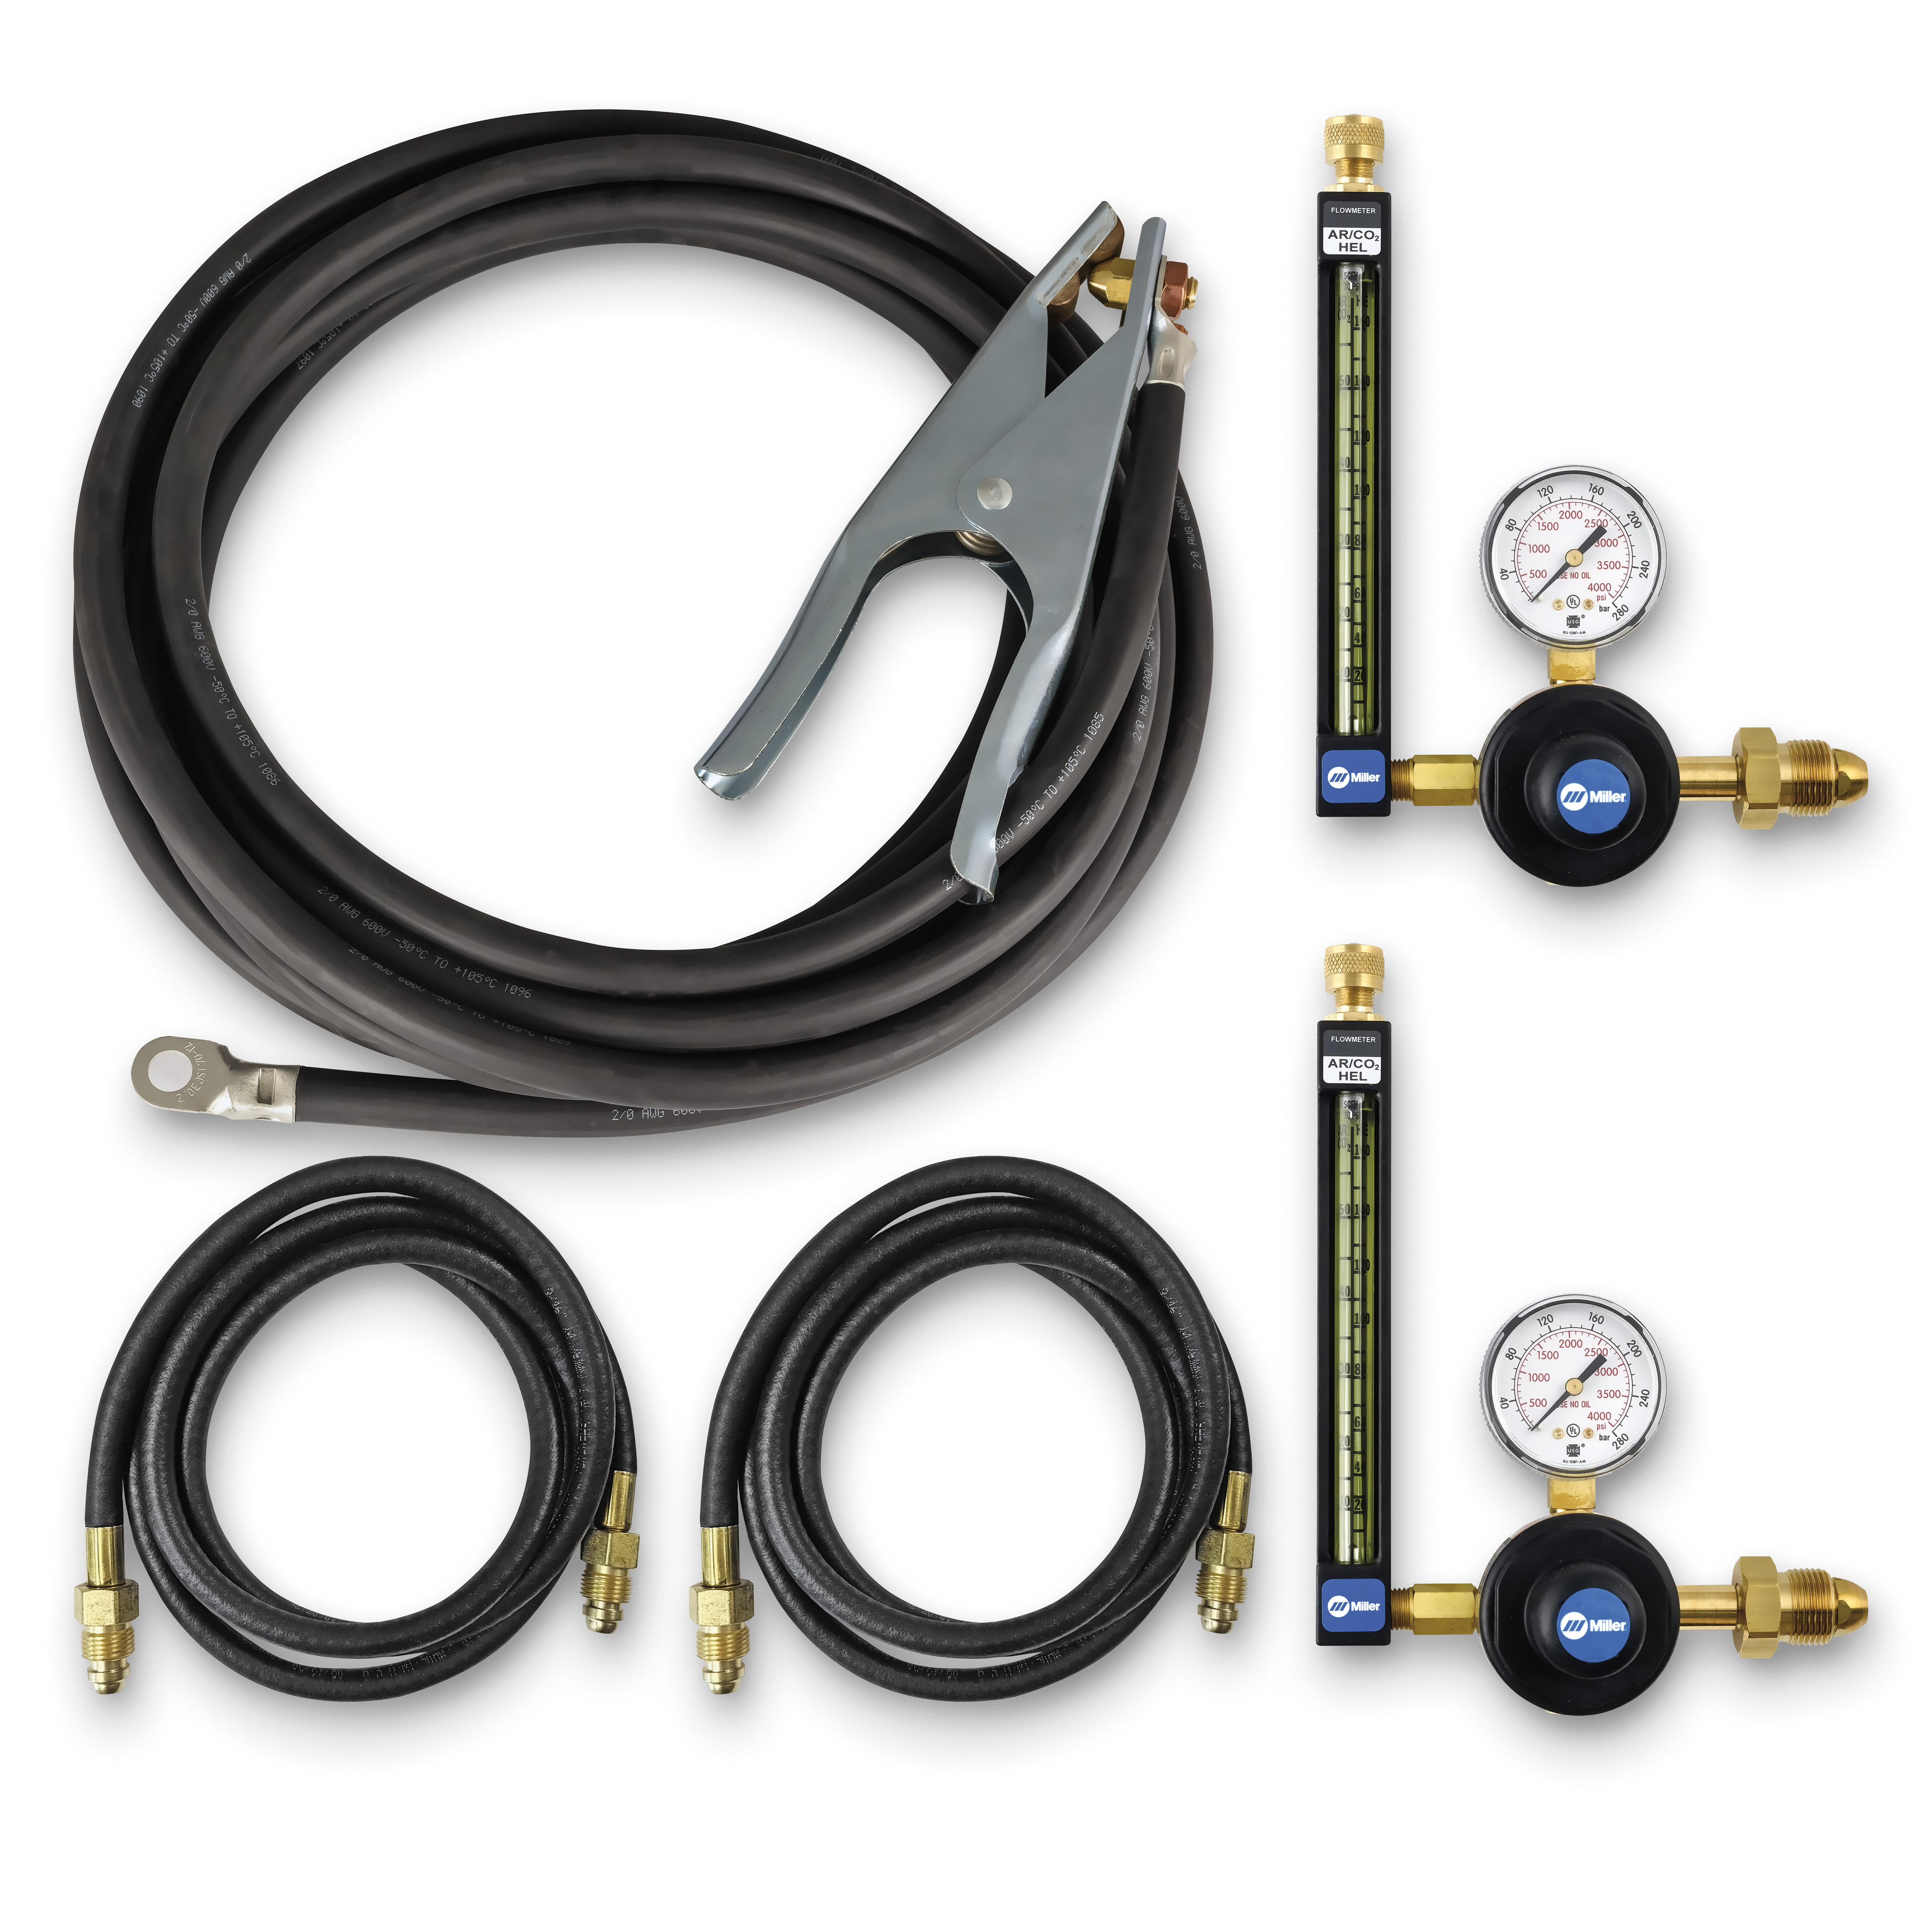 Pipeworx Accessories Kit for Dual Feeder | MillerWelds